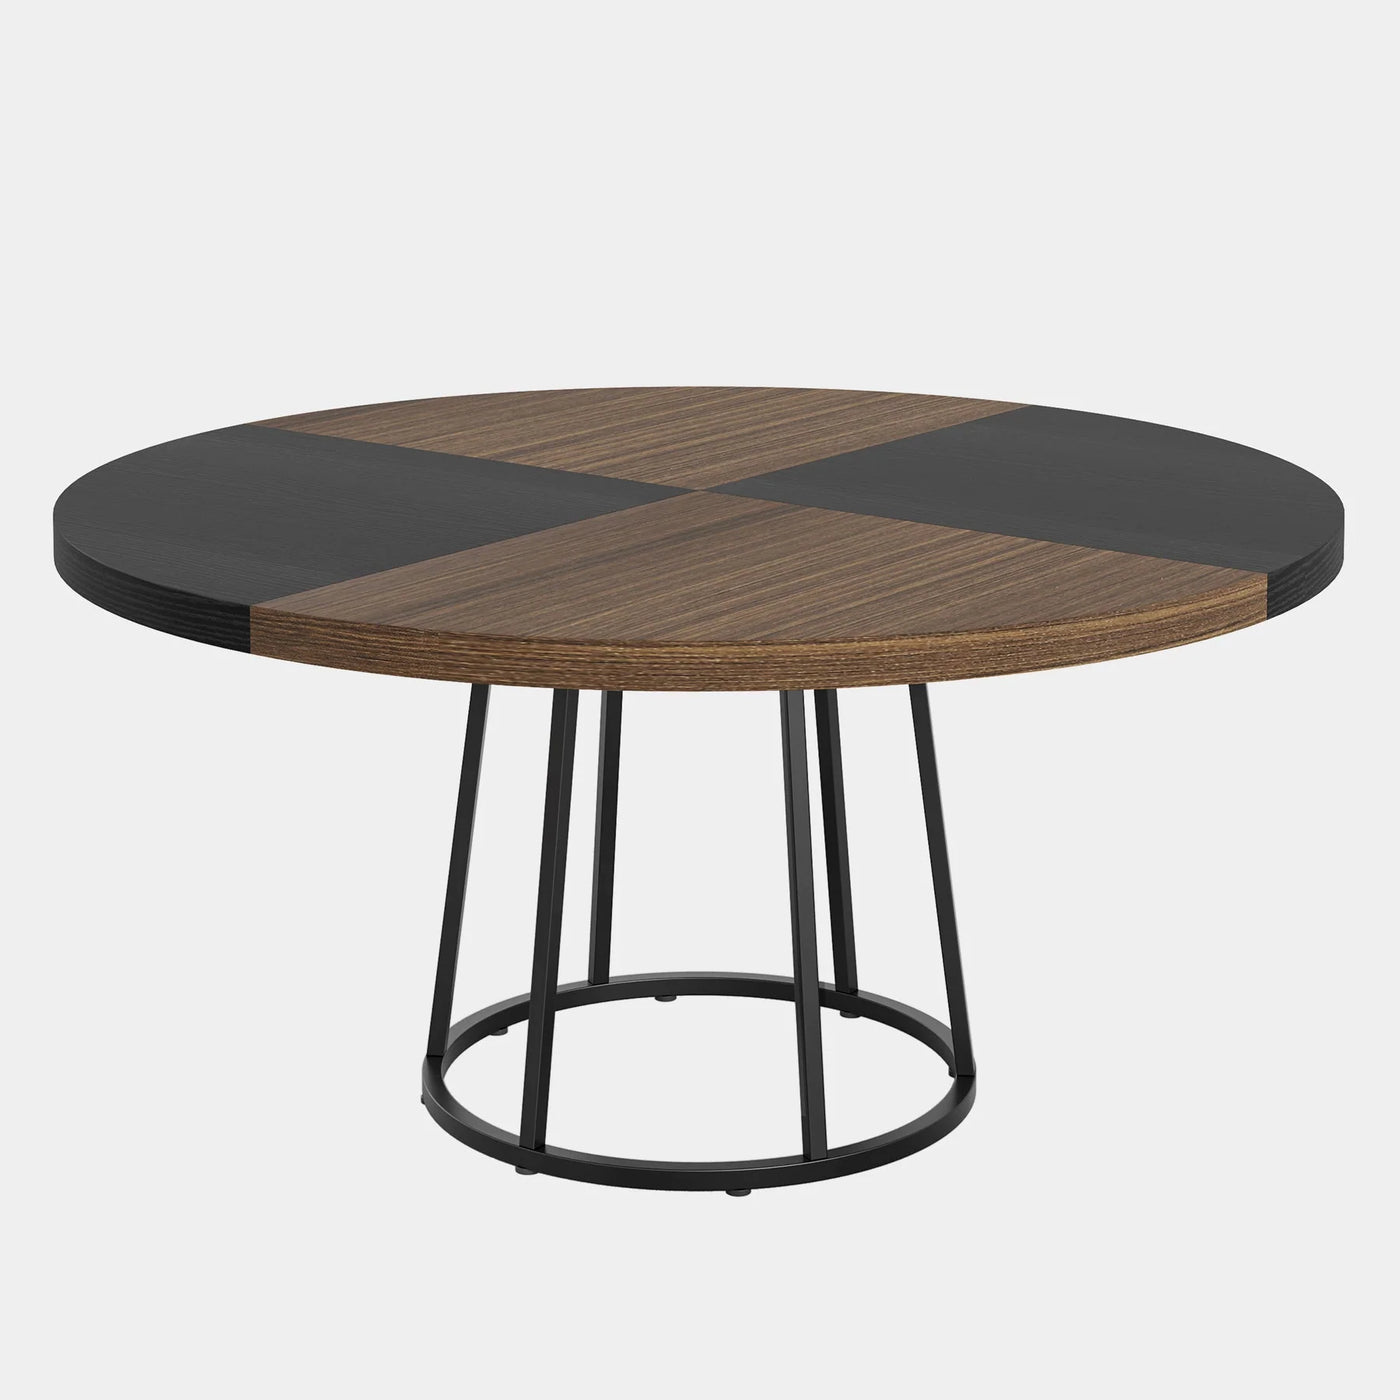 Casper Round Dining Table for 4 People, 47" Kitchen Table with Circle Metal Base